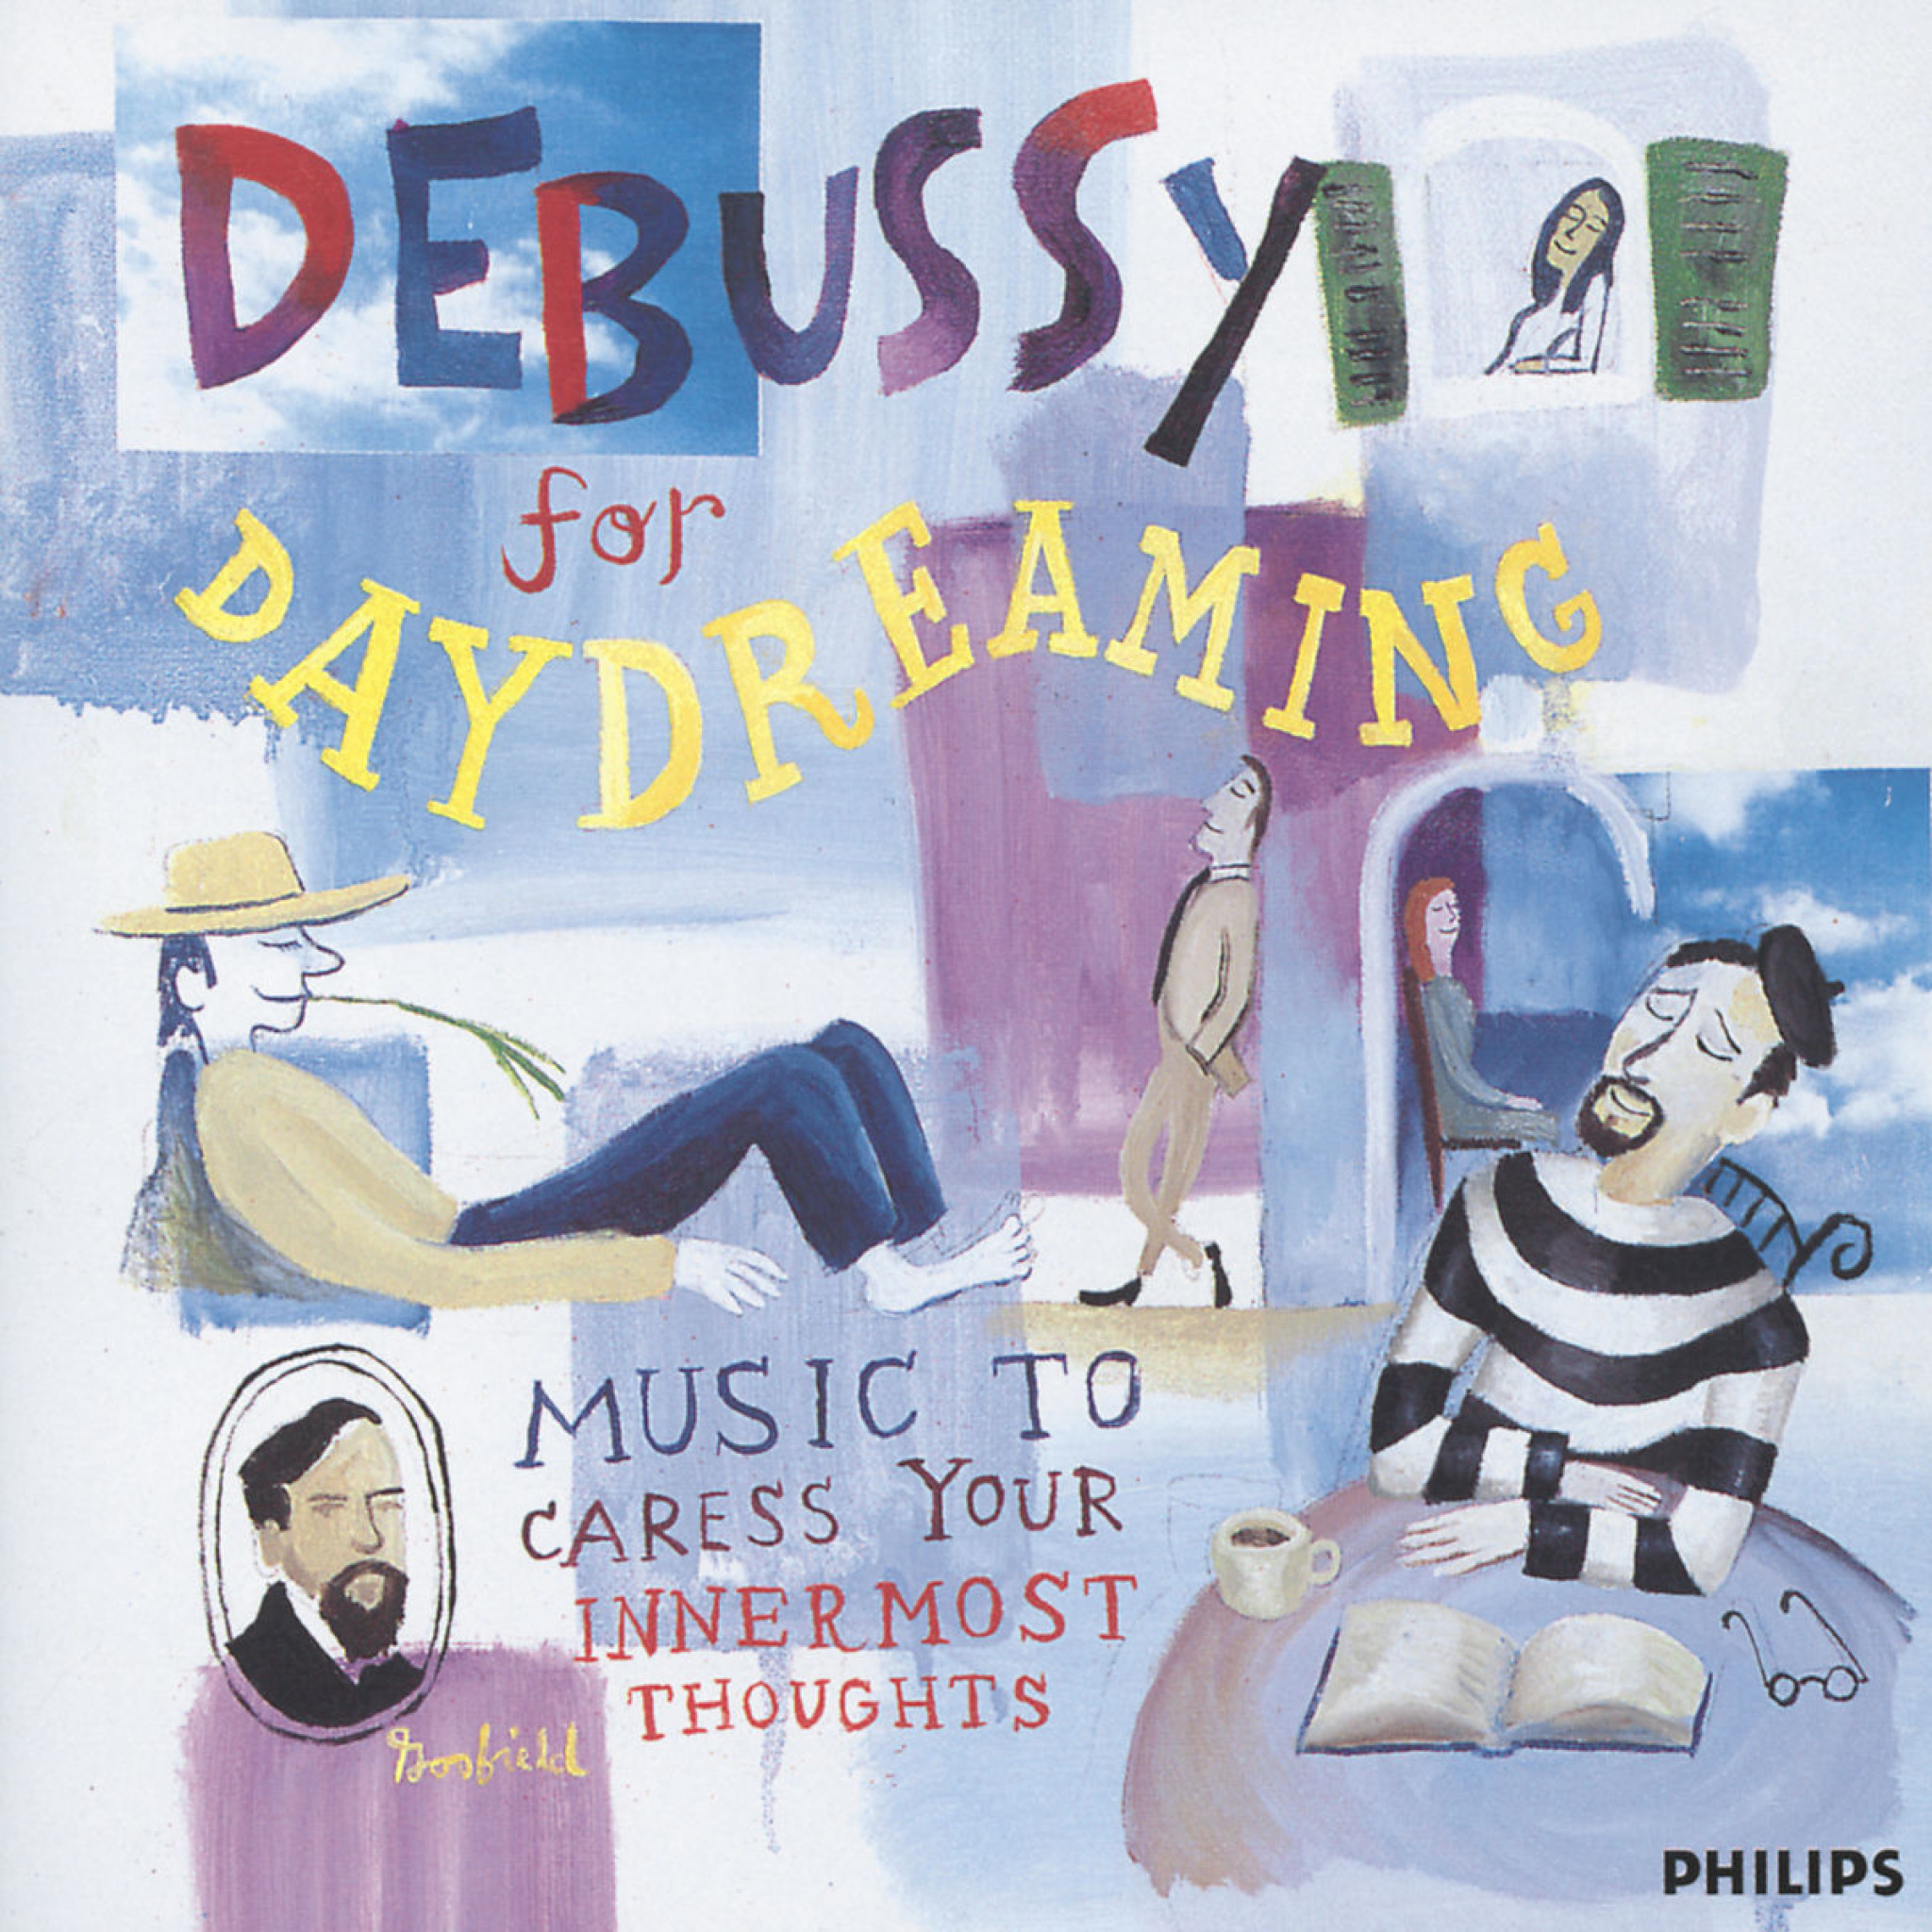 DEBUSSY FOR DAYDREAMING 